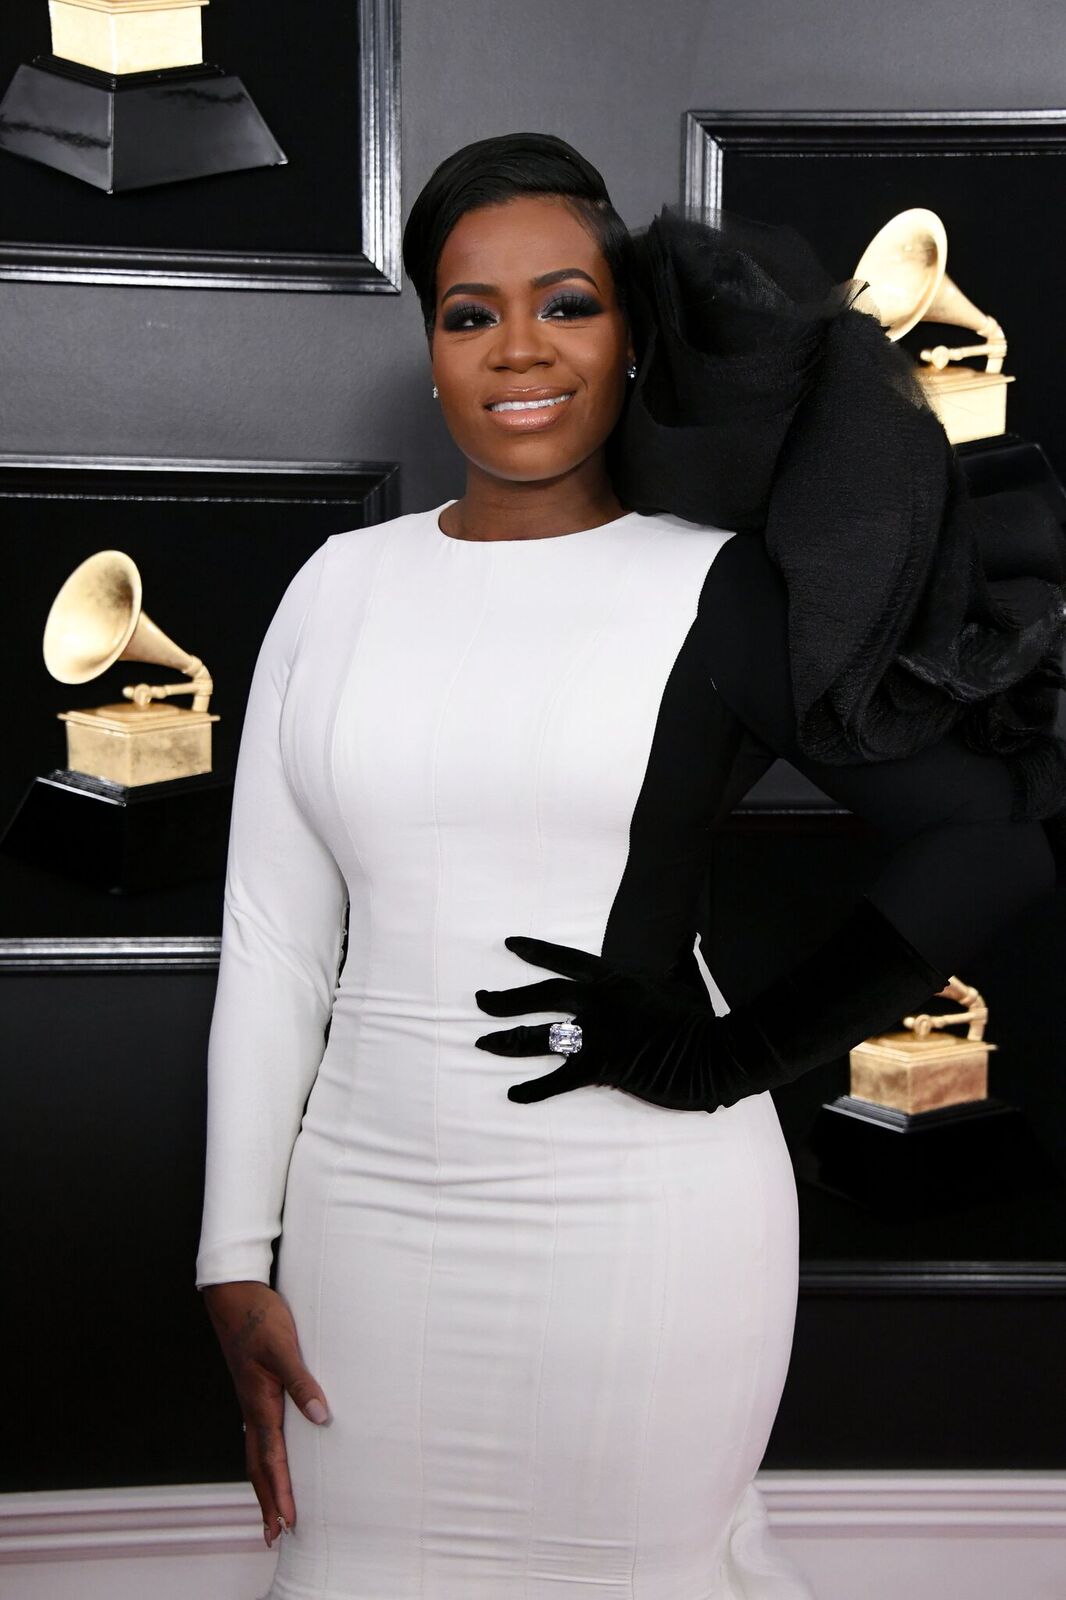 Fantasia Barrino attends the 61st Annual GRAMMY Awards at Staples Center on February 10, 2019 | Photo: Getty Images